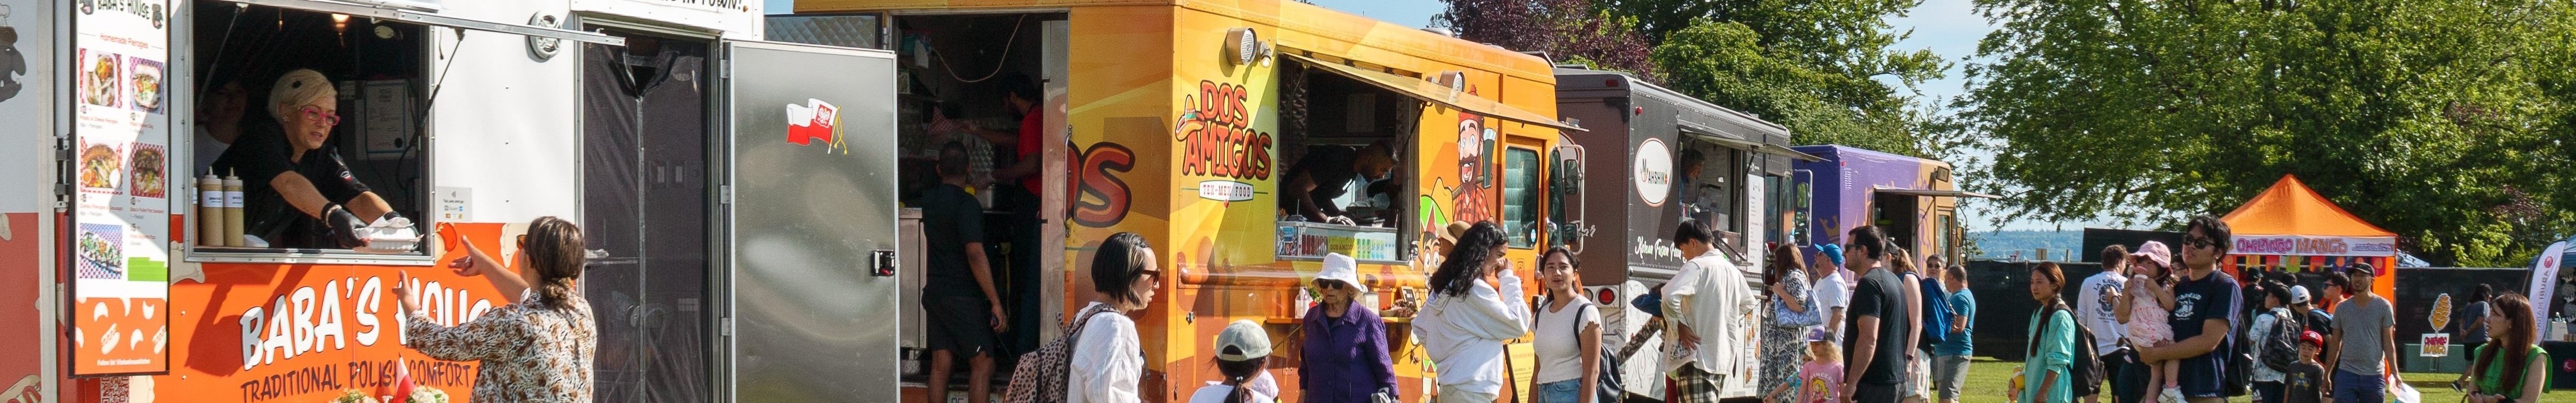  A row of food trucks parked on grassy field, with colorful signs and people lined up to order from the food vendors.